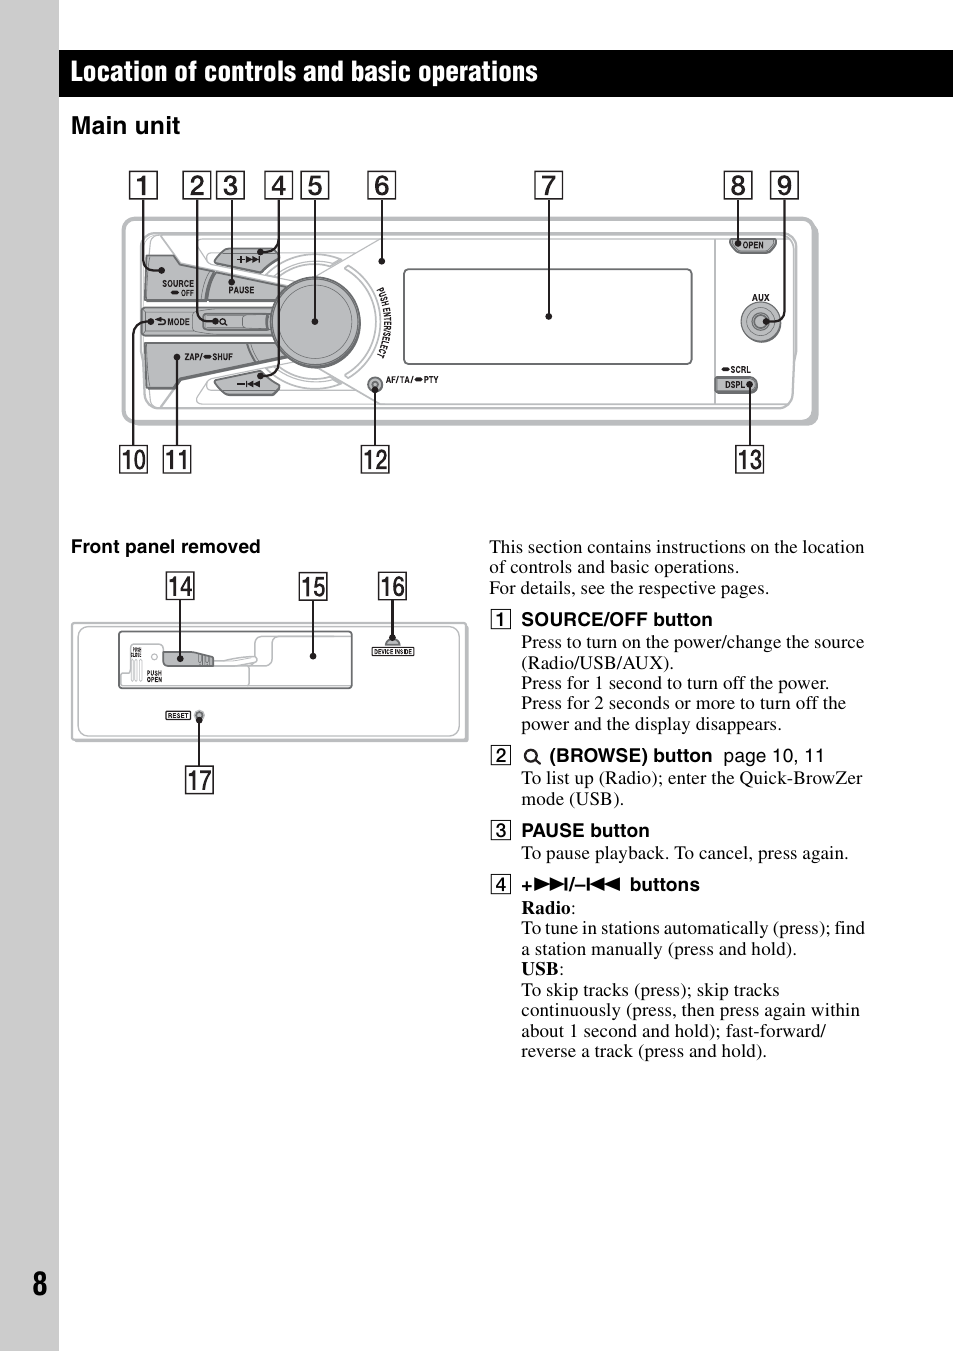 Location of controls and basic operations, Main unit | Sony DSX-S100 User Manual | Page 8 / 132